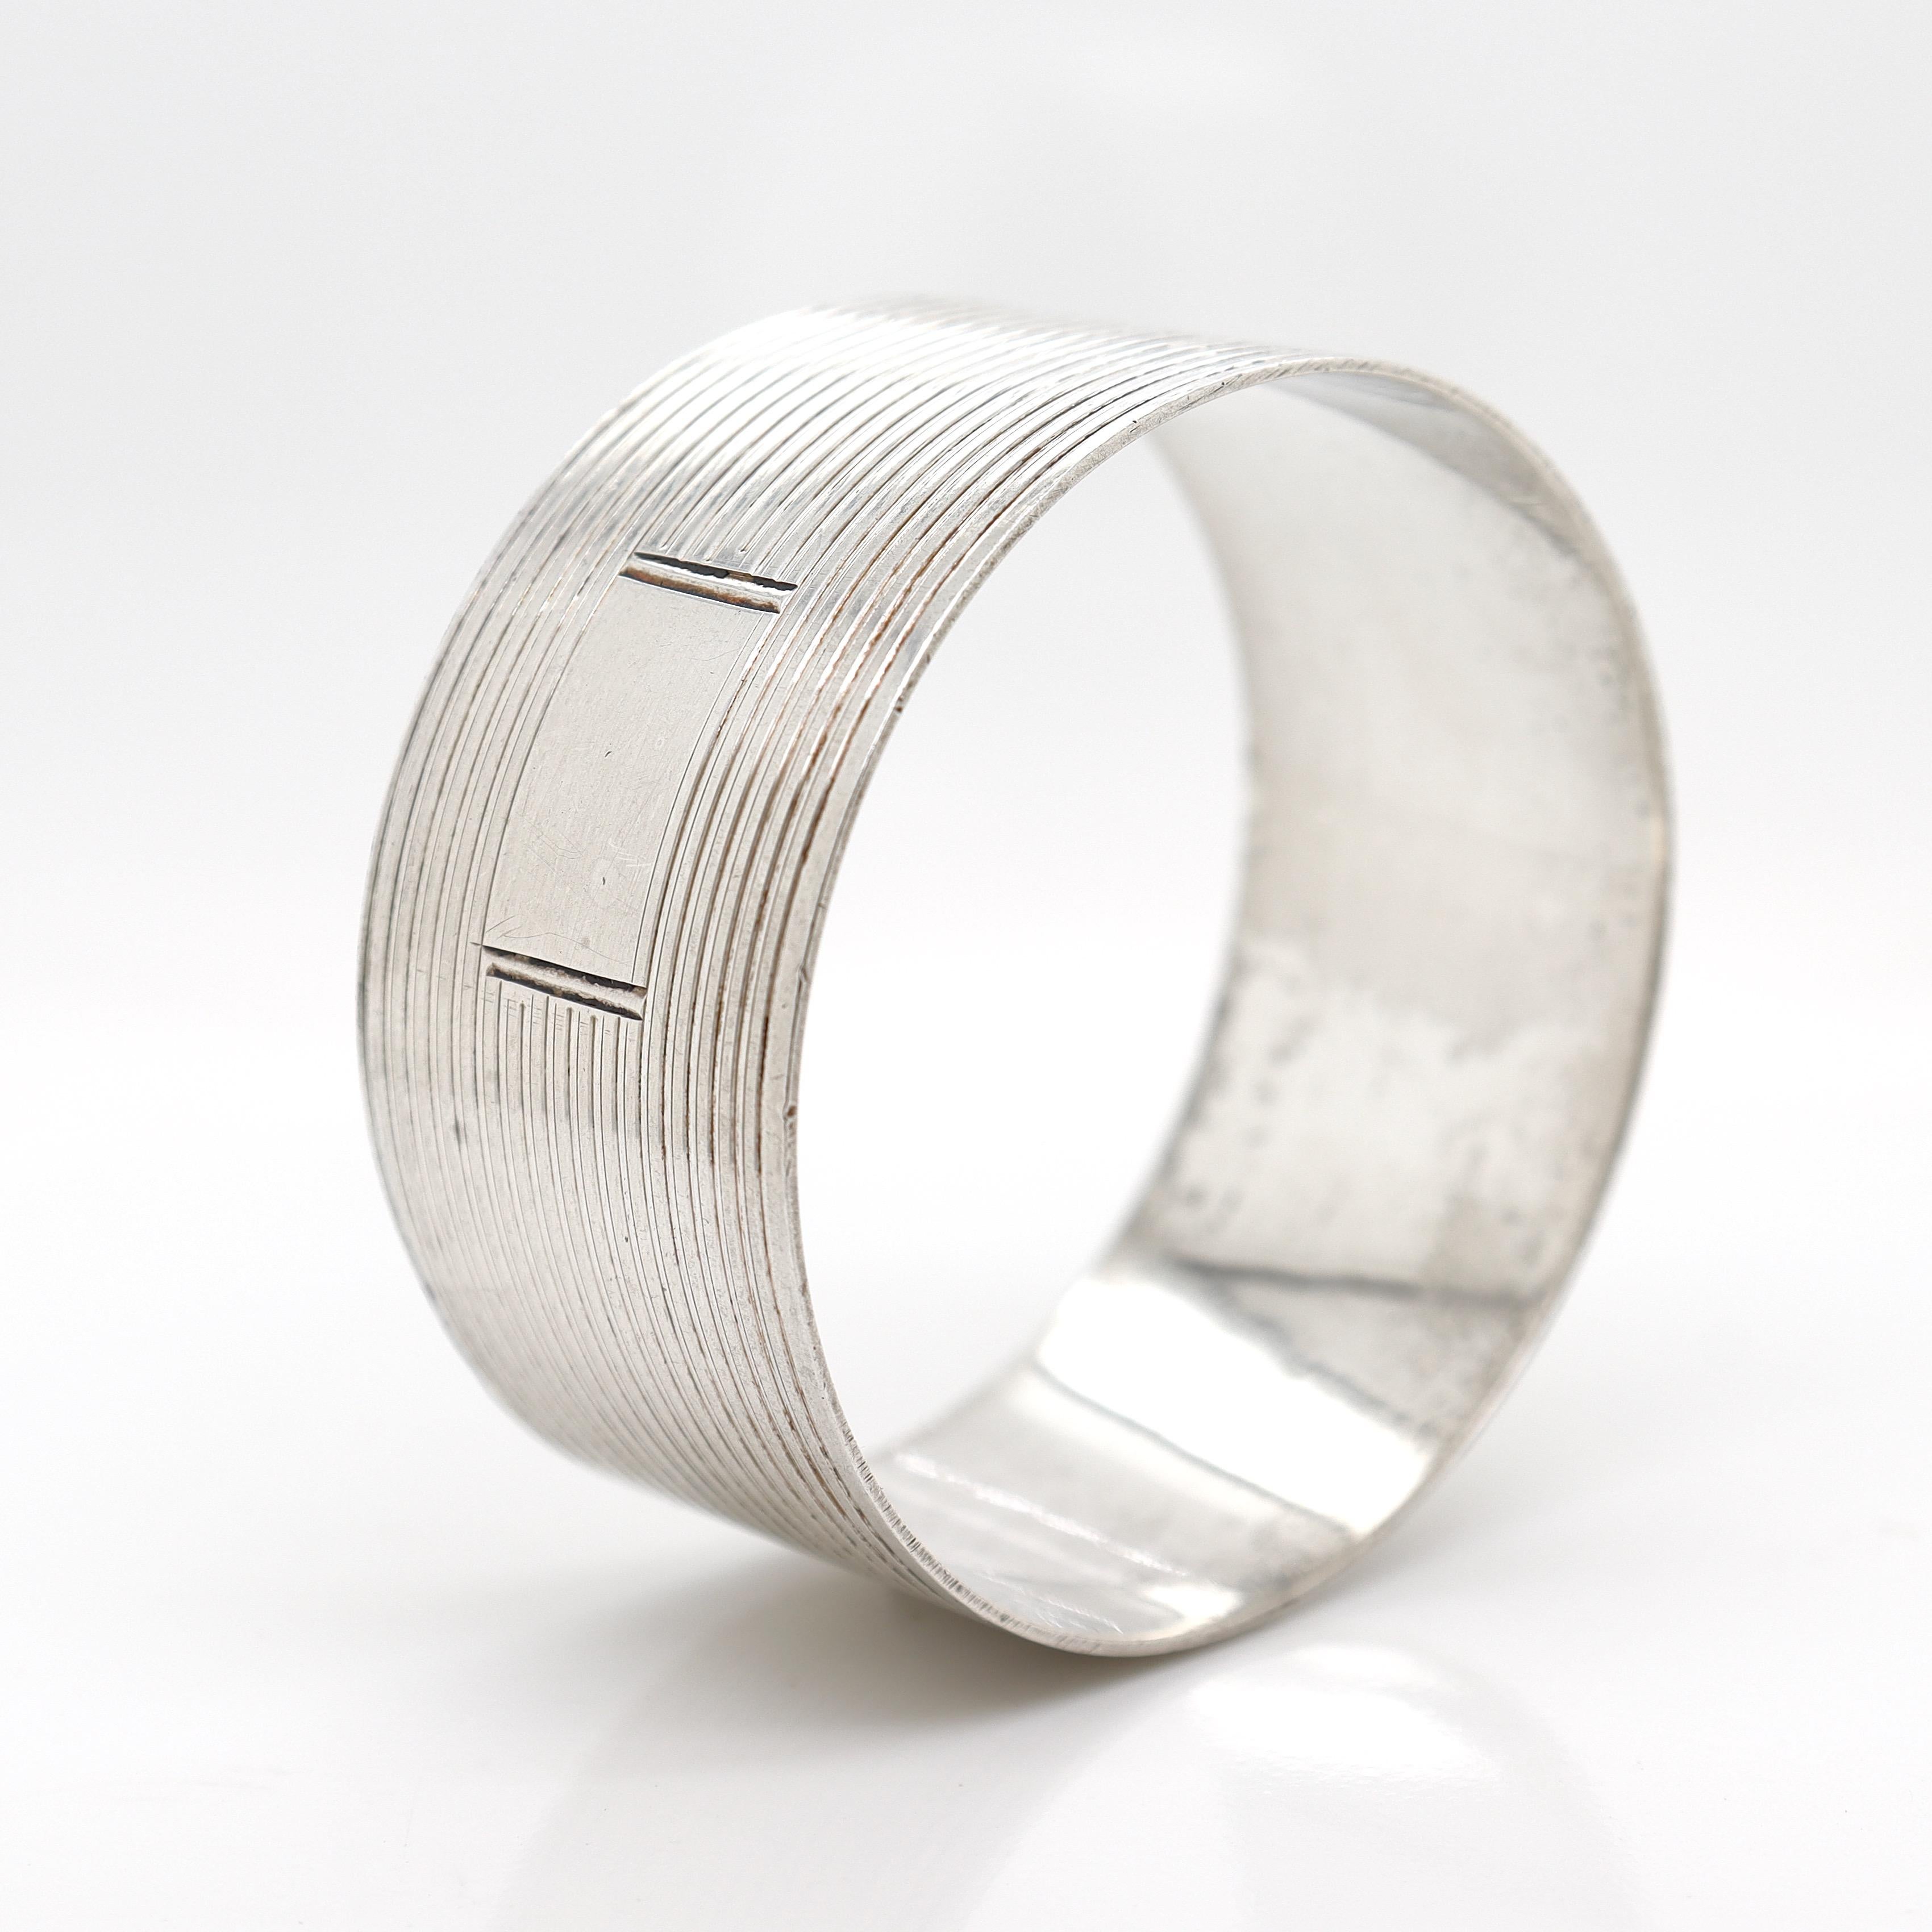 Modern Midcentury English Engine Turned Sterling Silver Napkin Ring by John Rose For Sale